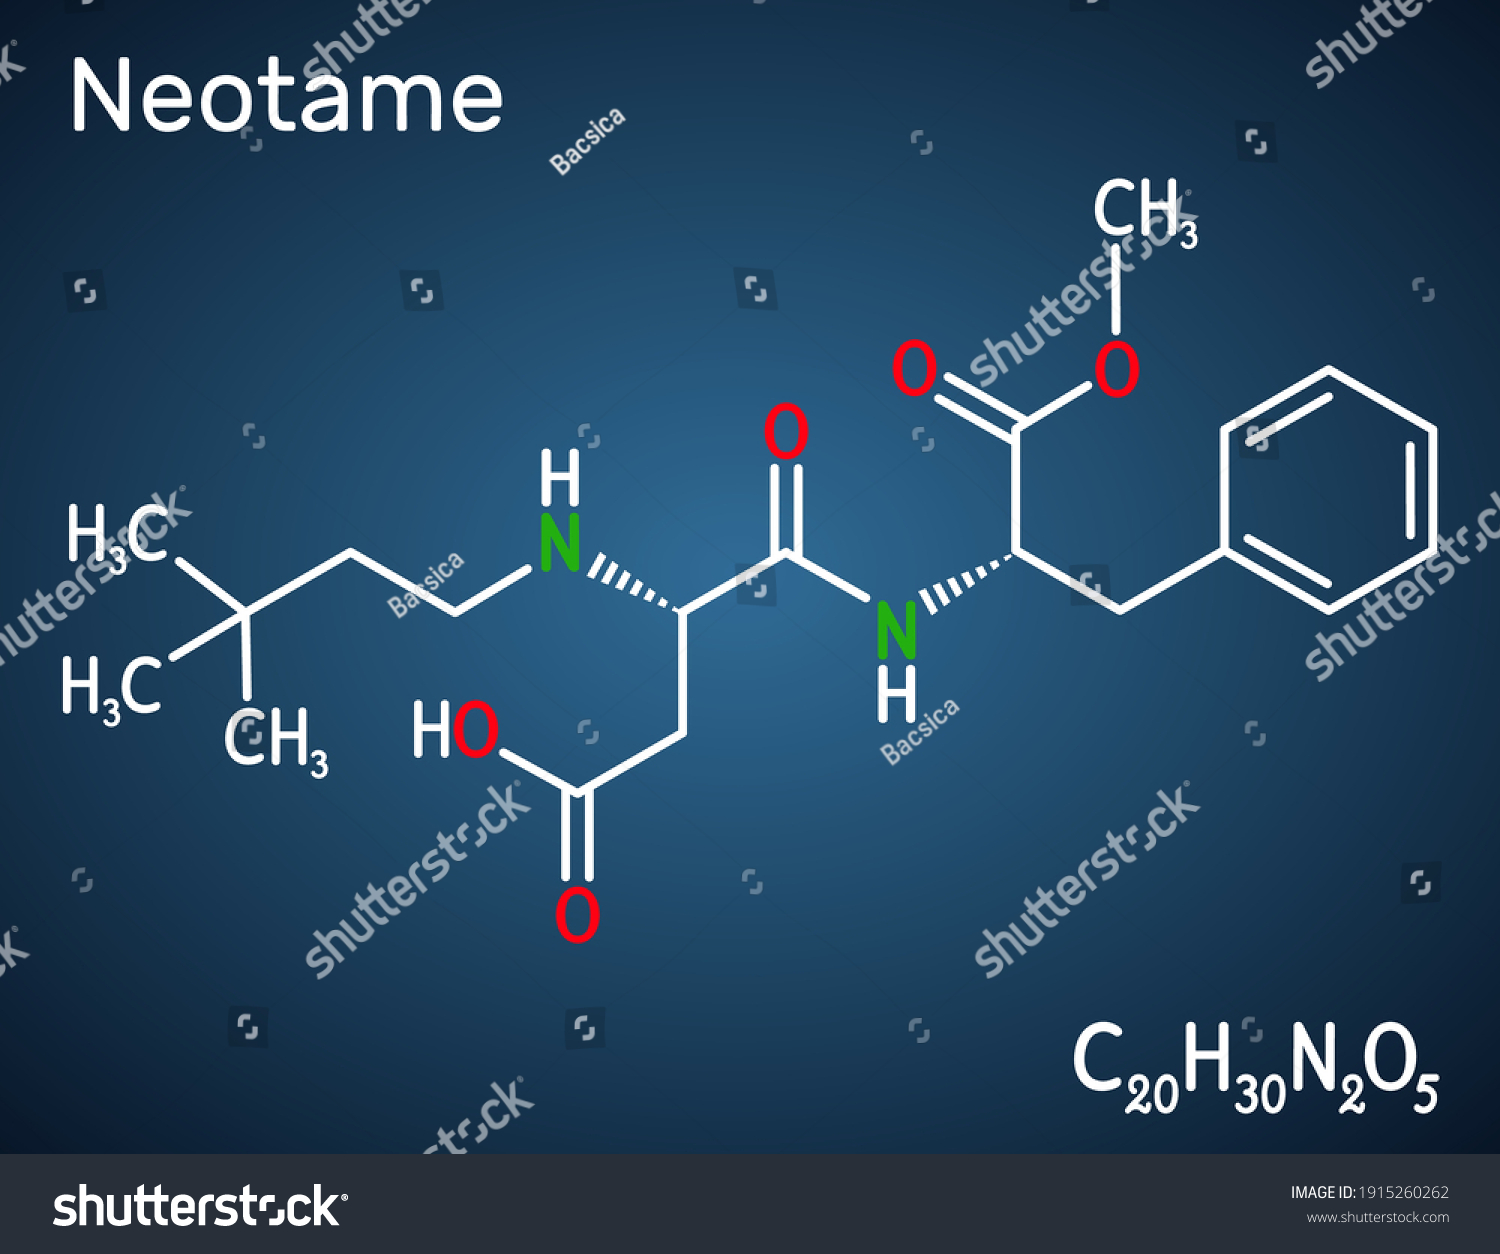 SVG of Neotame, sweetening agent, E961molecule. It is dipeptide with peptide linkage, artificial sweetener, aspartame analog. Structural chemical formula on the dark blue background. Vector illustration svg